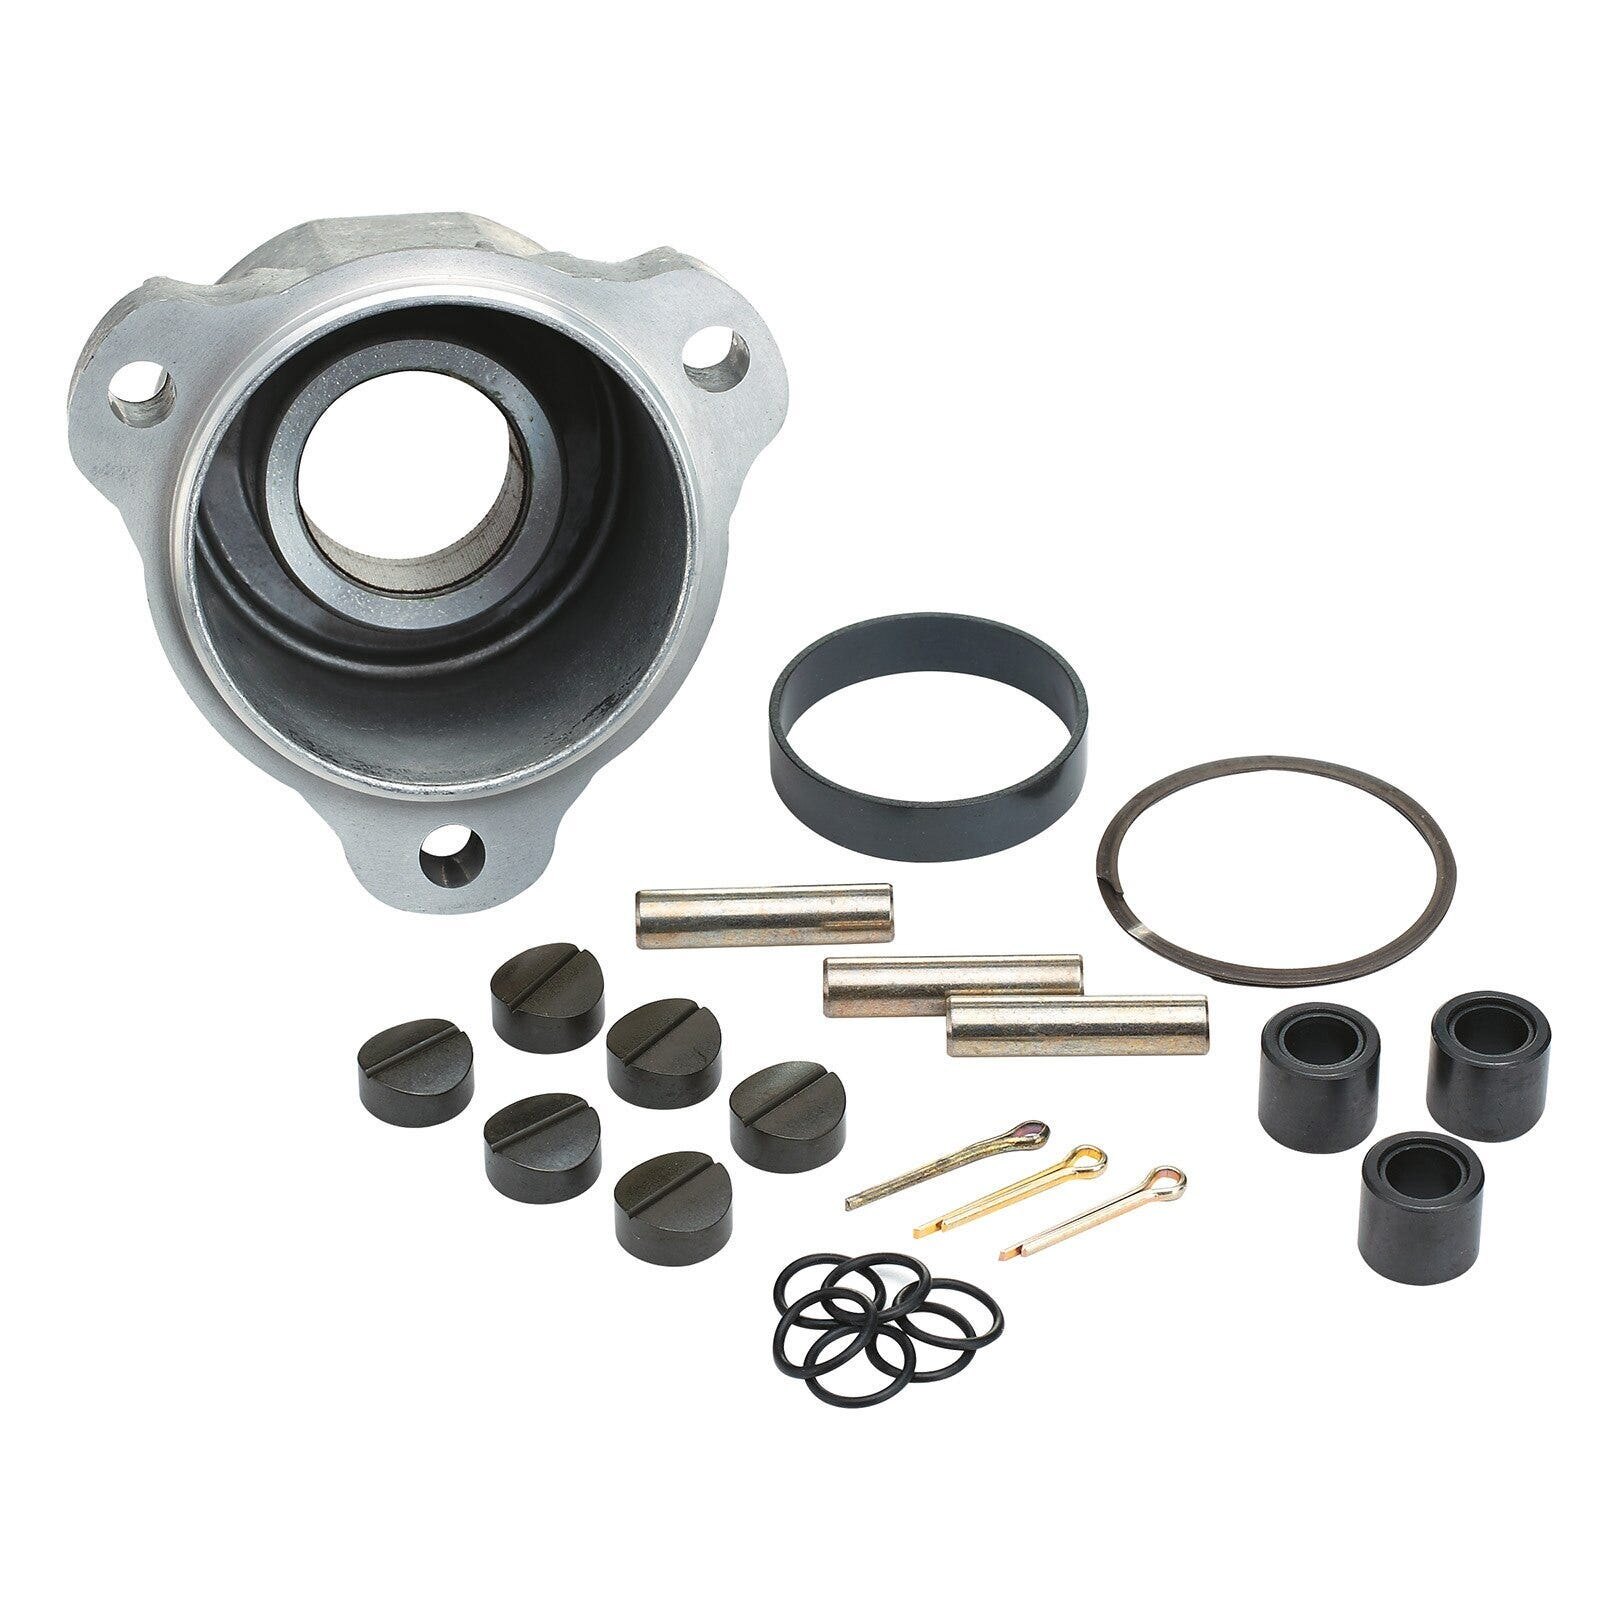 Maintenance Kit for TRA Drive Pulley 2008 to 2010 (800R P TEK & 800R E TEC)